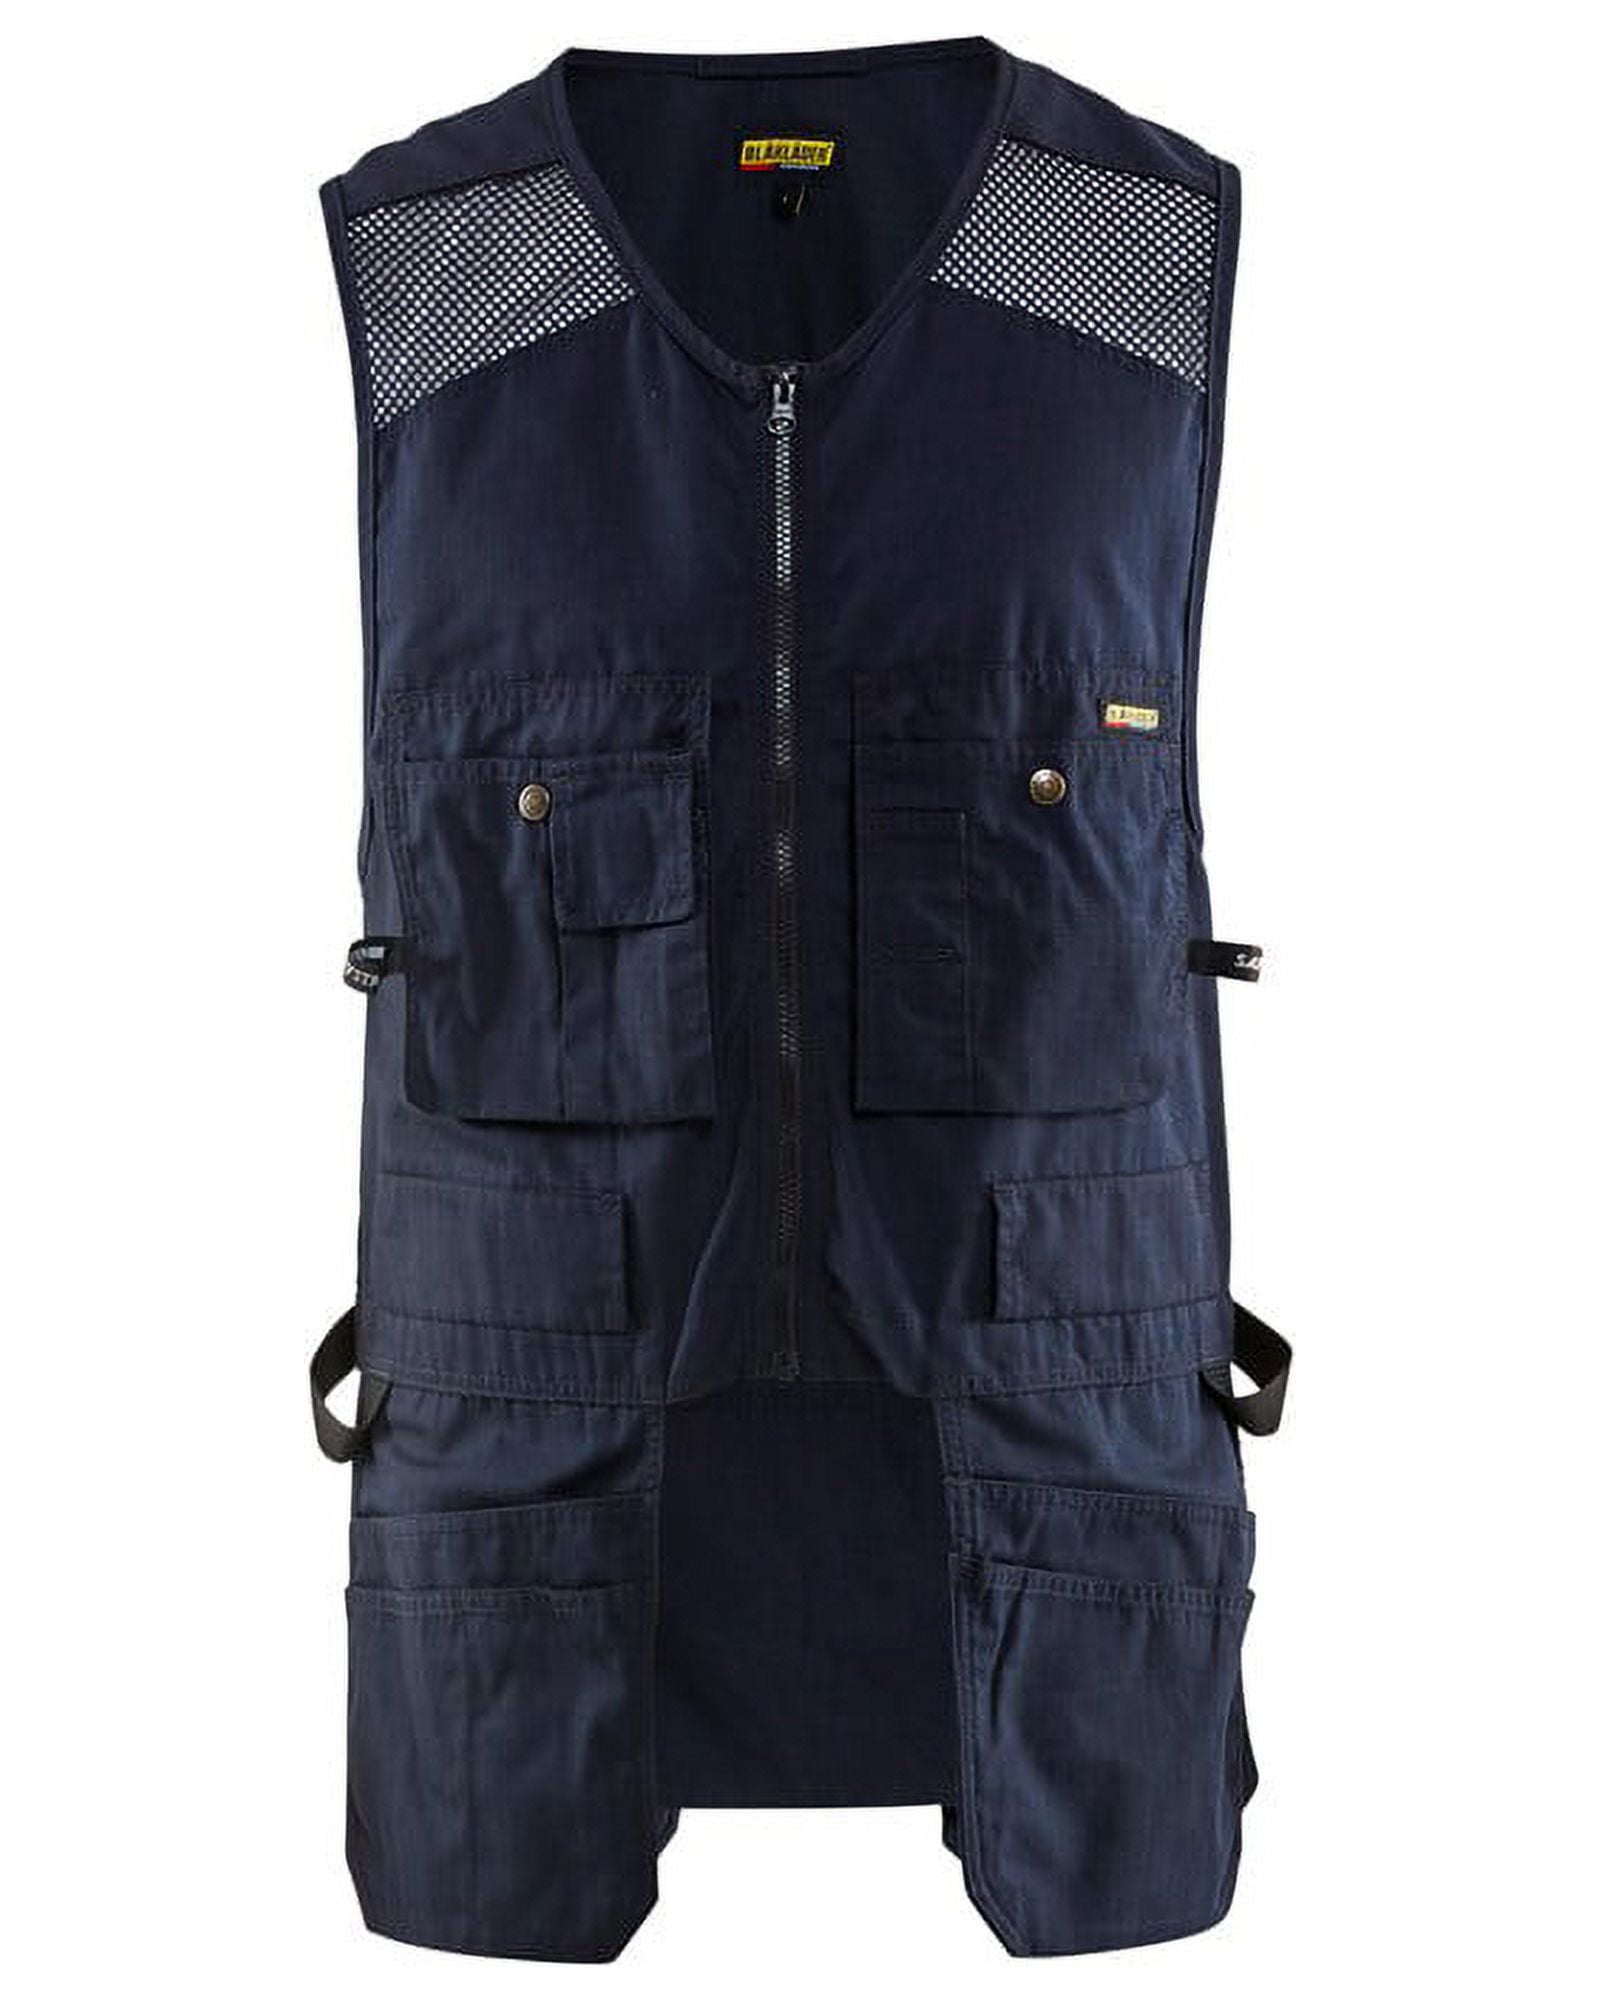 Blaklader US Utility Vest with Mesh for Carpentry Construction (Navy ...